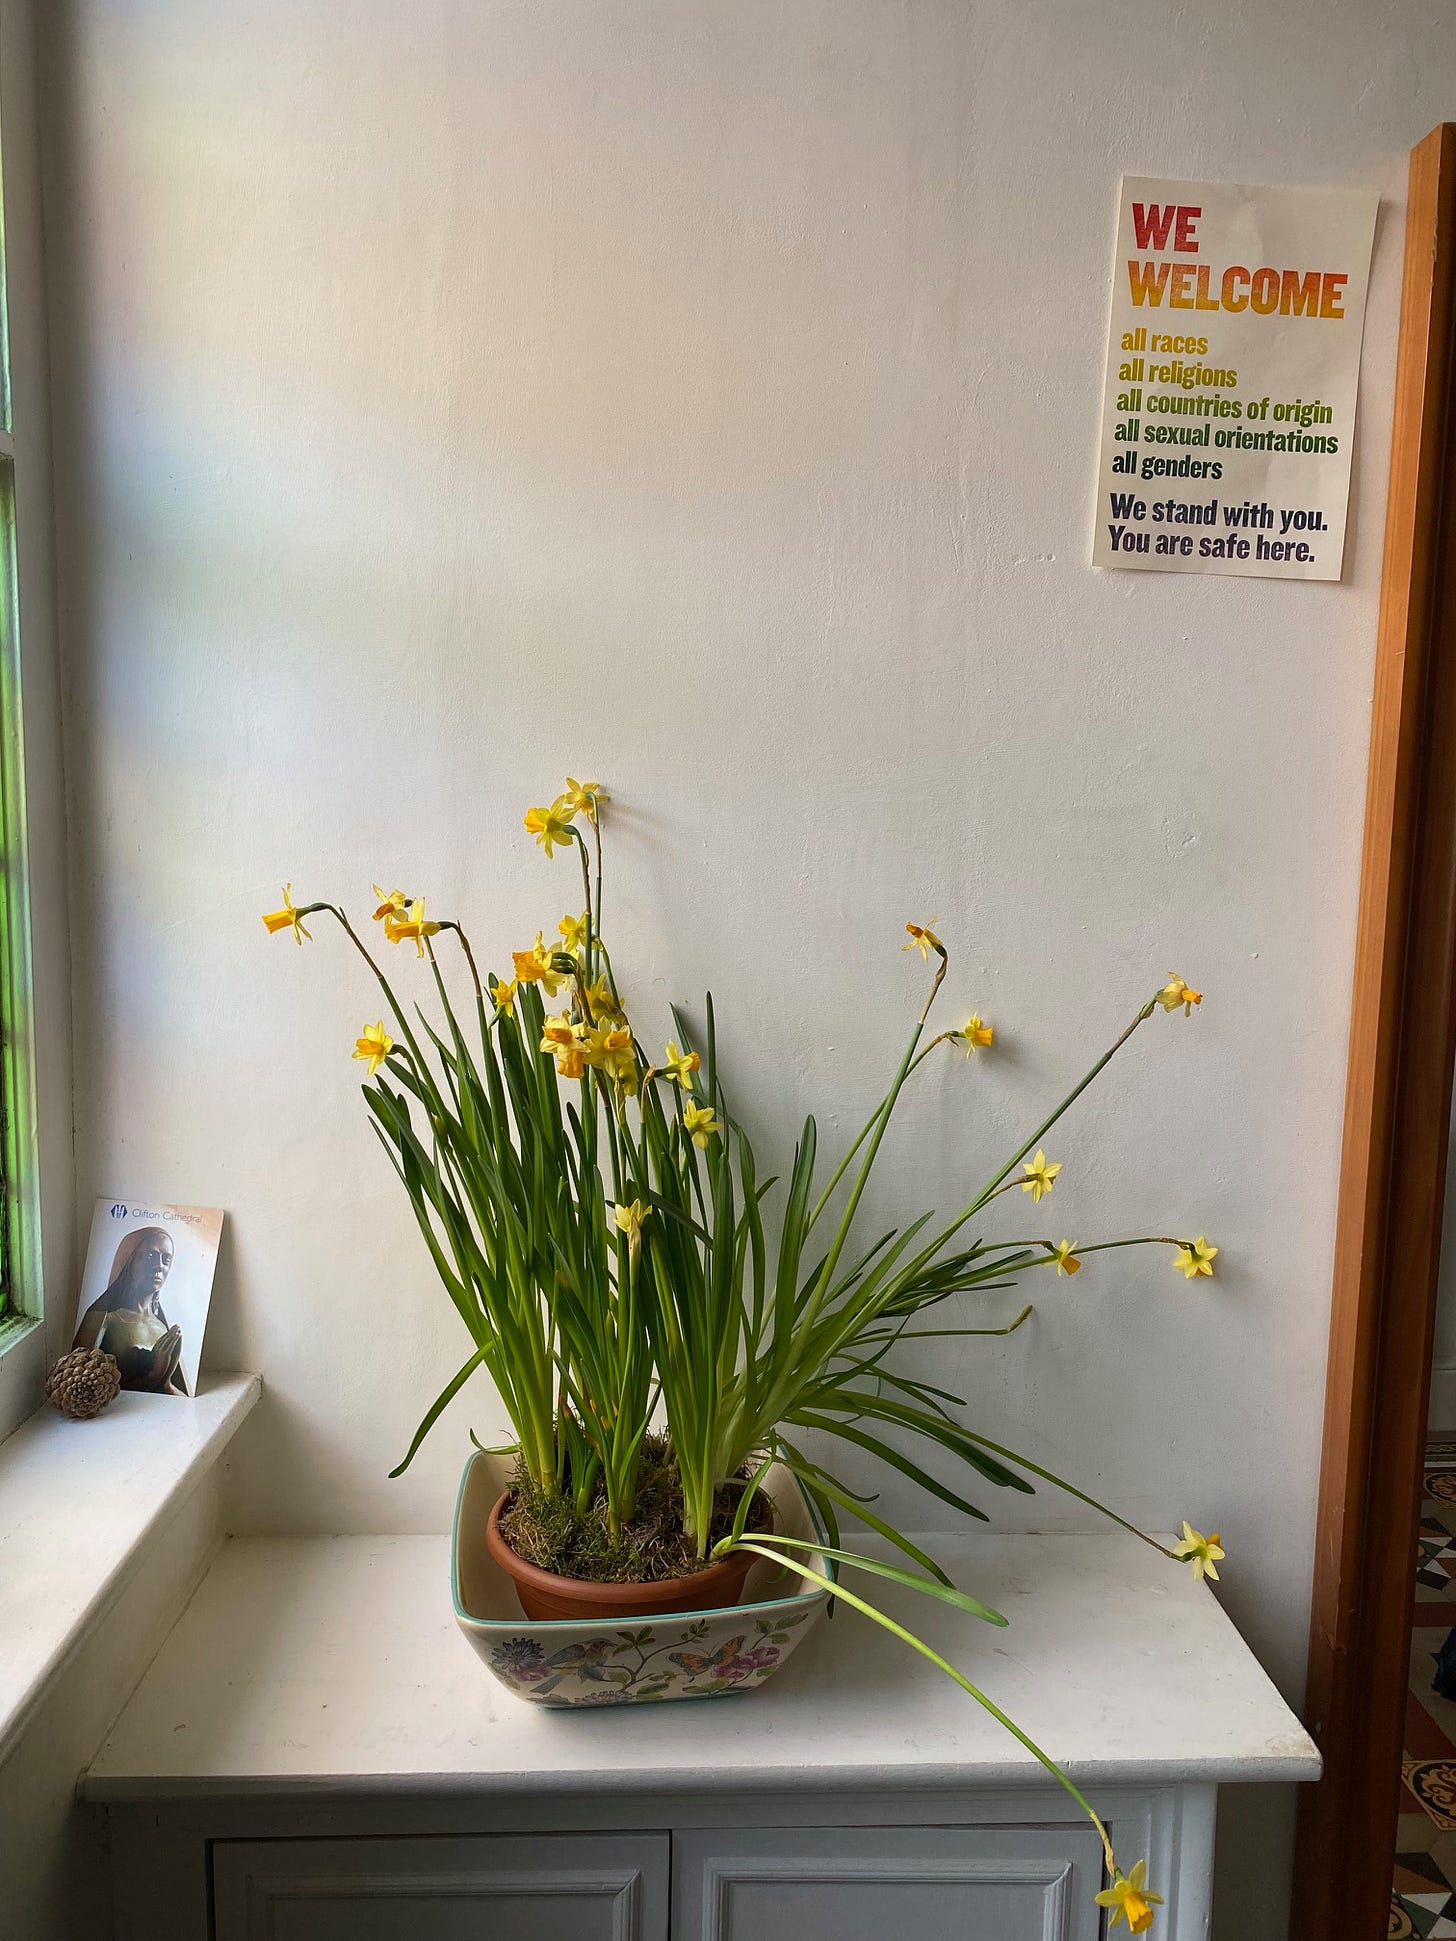 A bowl of daffodils begin to fade in a ceramic pot on a shelf in an interior room against a white wall